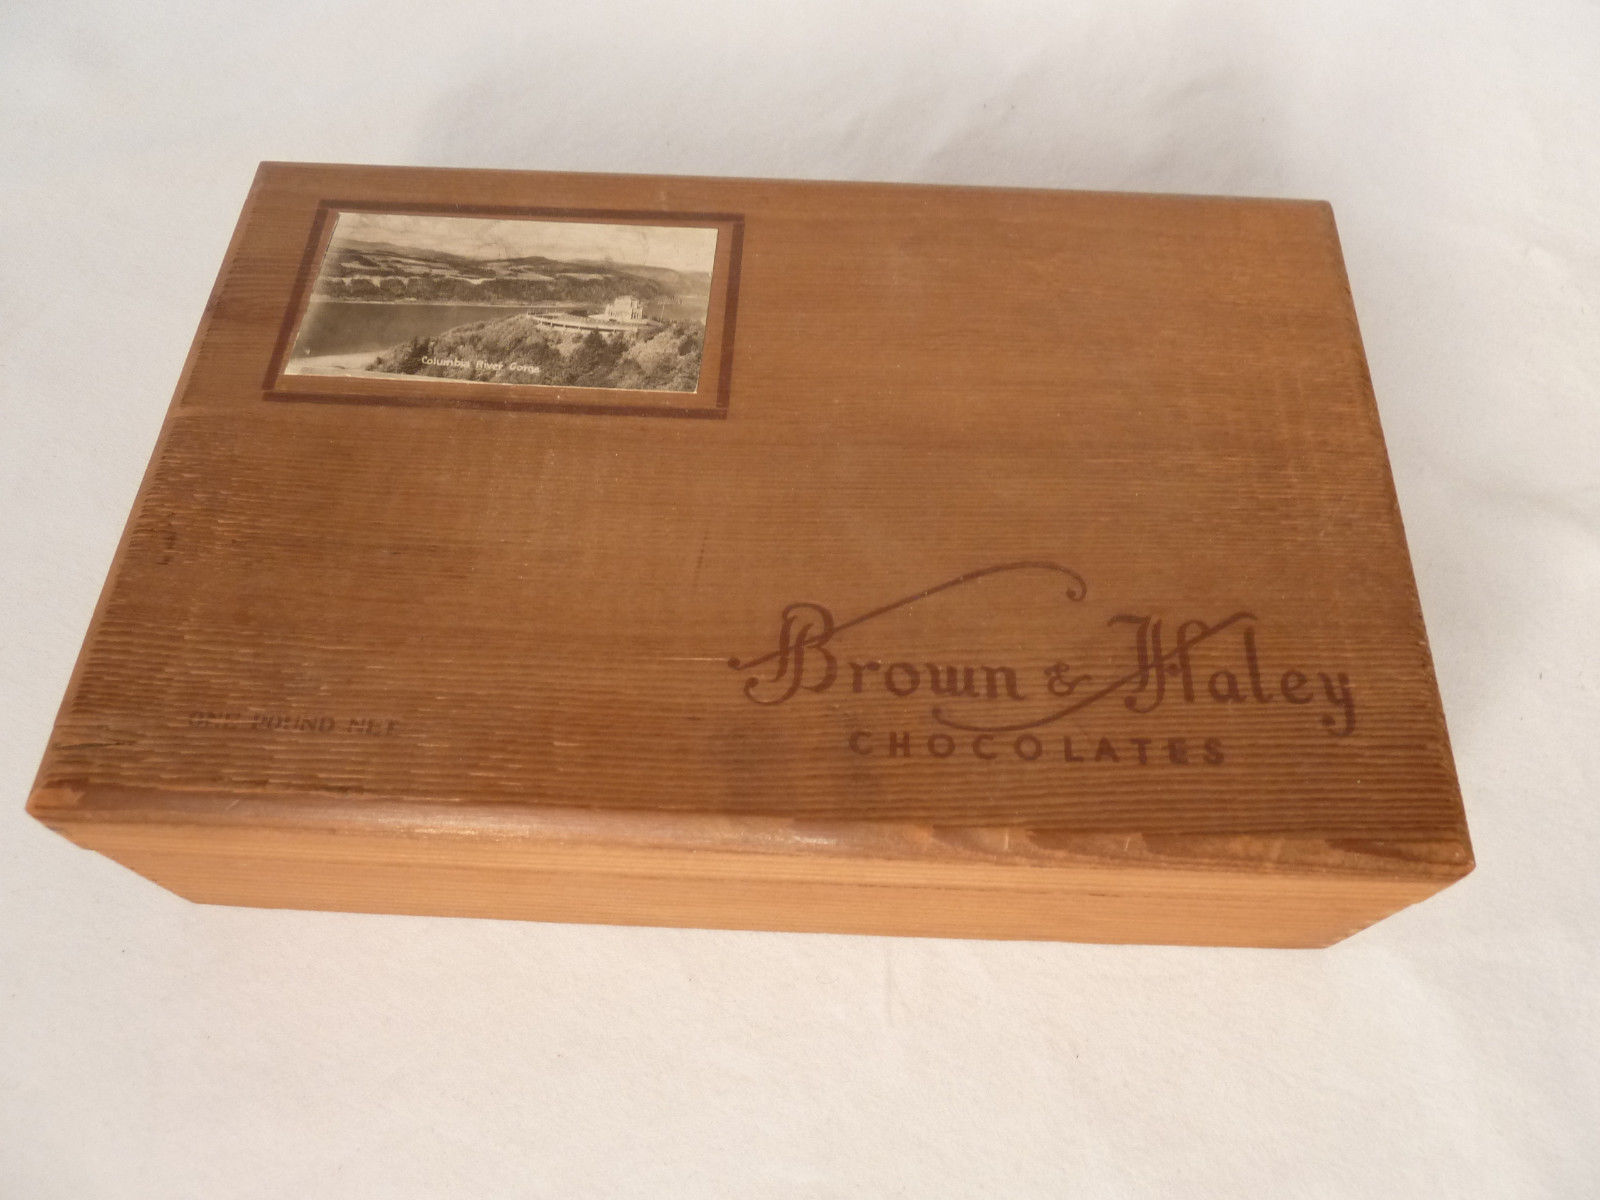 Vintage Brown and Haley Chocolate Wooden Box, Columbia River Gorge ...